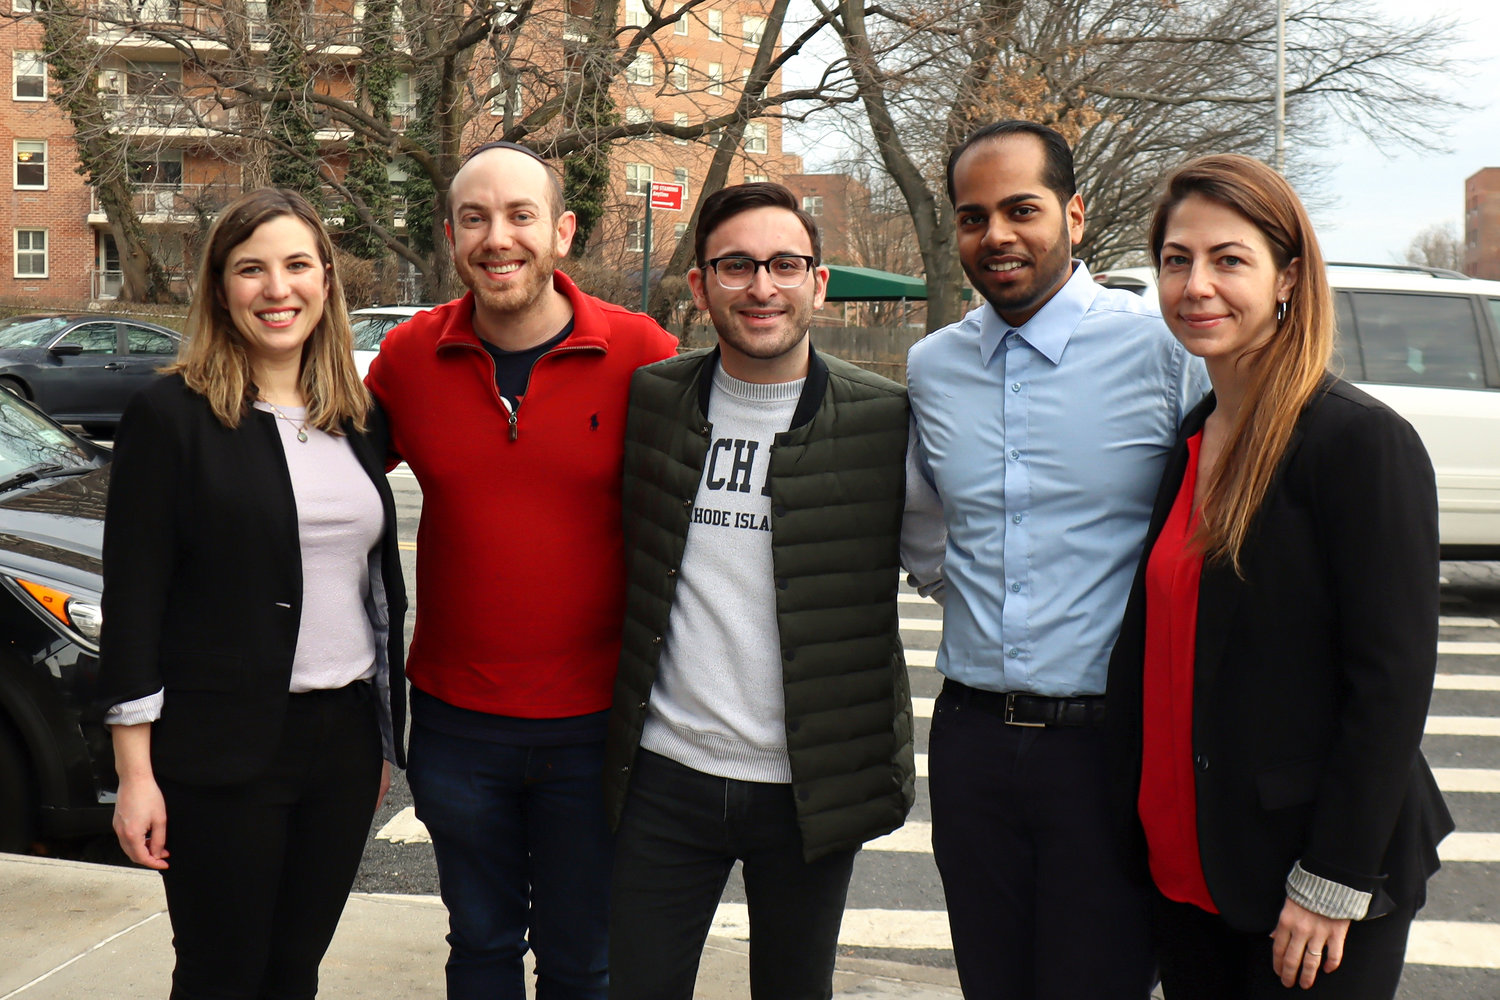 A slate of ‘emerging’ candidates are challenging the Democratic Party establishment in down-ticket races in this part of the Bronx, part of a larger movement that includes Christian Amato, center, who is running for the state senate seat currently held by his former boss, Alessandra Biaggi. This alternative slate includes, from left, Morgan Evers, Aaron Stayman, Ramdat Singh and Abigail Martin.